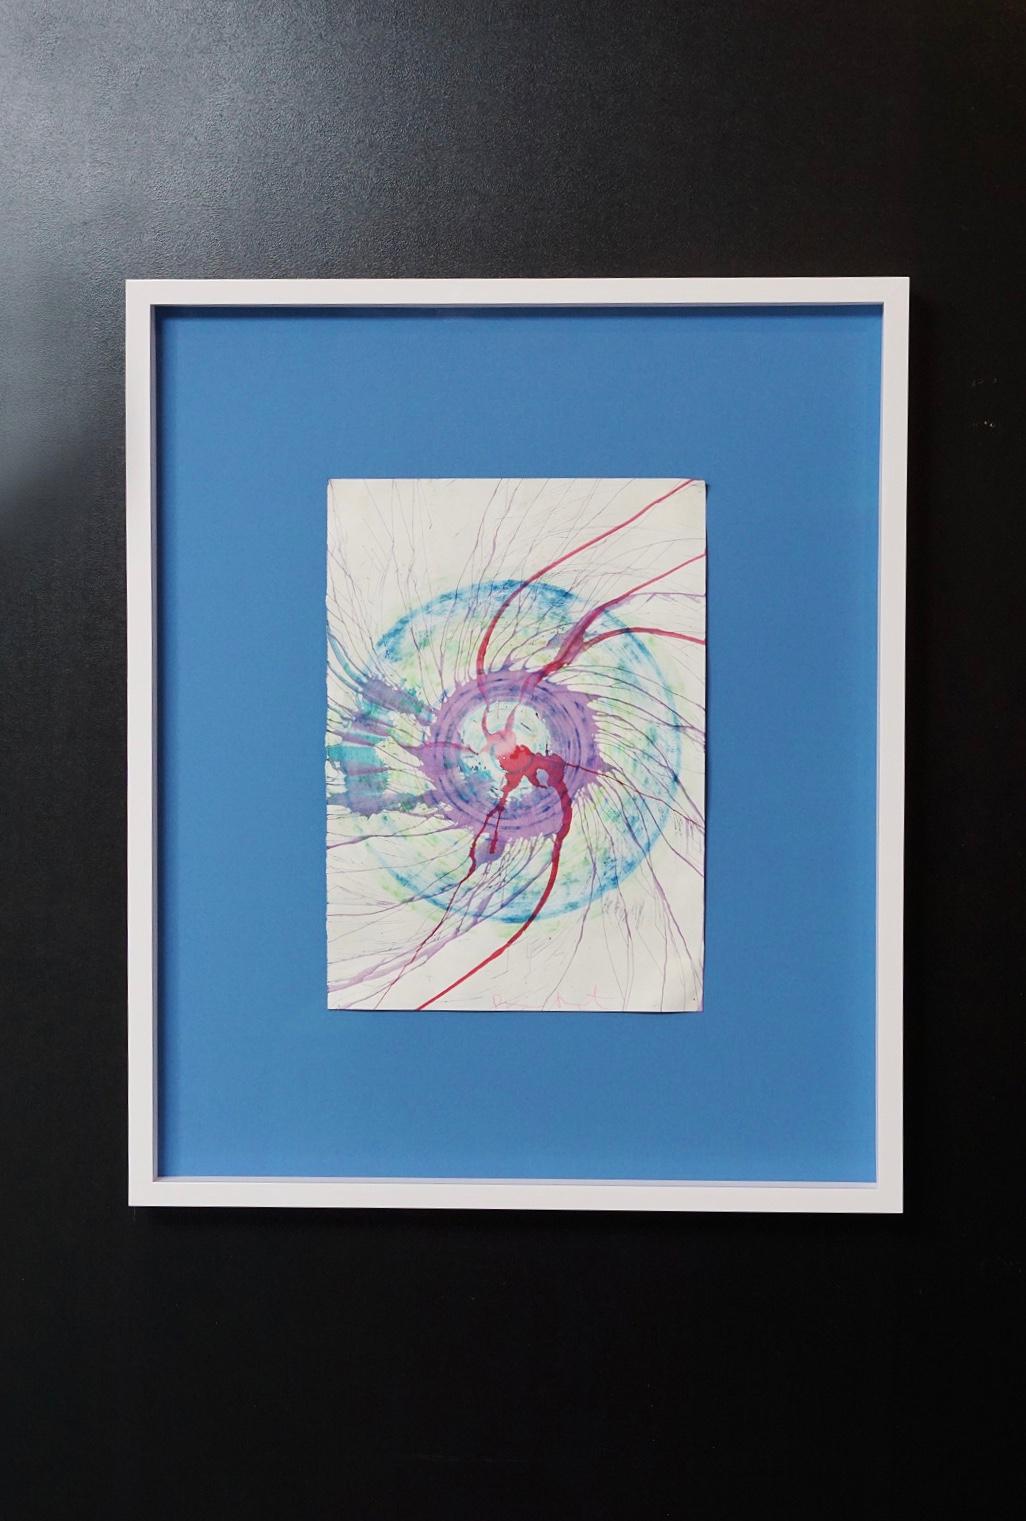 Unique Spin Drawing  - Mixed Media Art by Damien Hirst